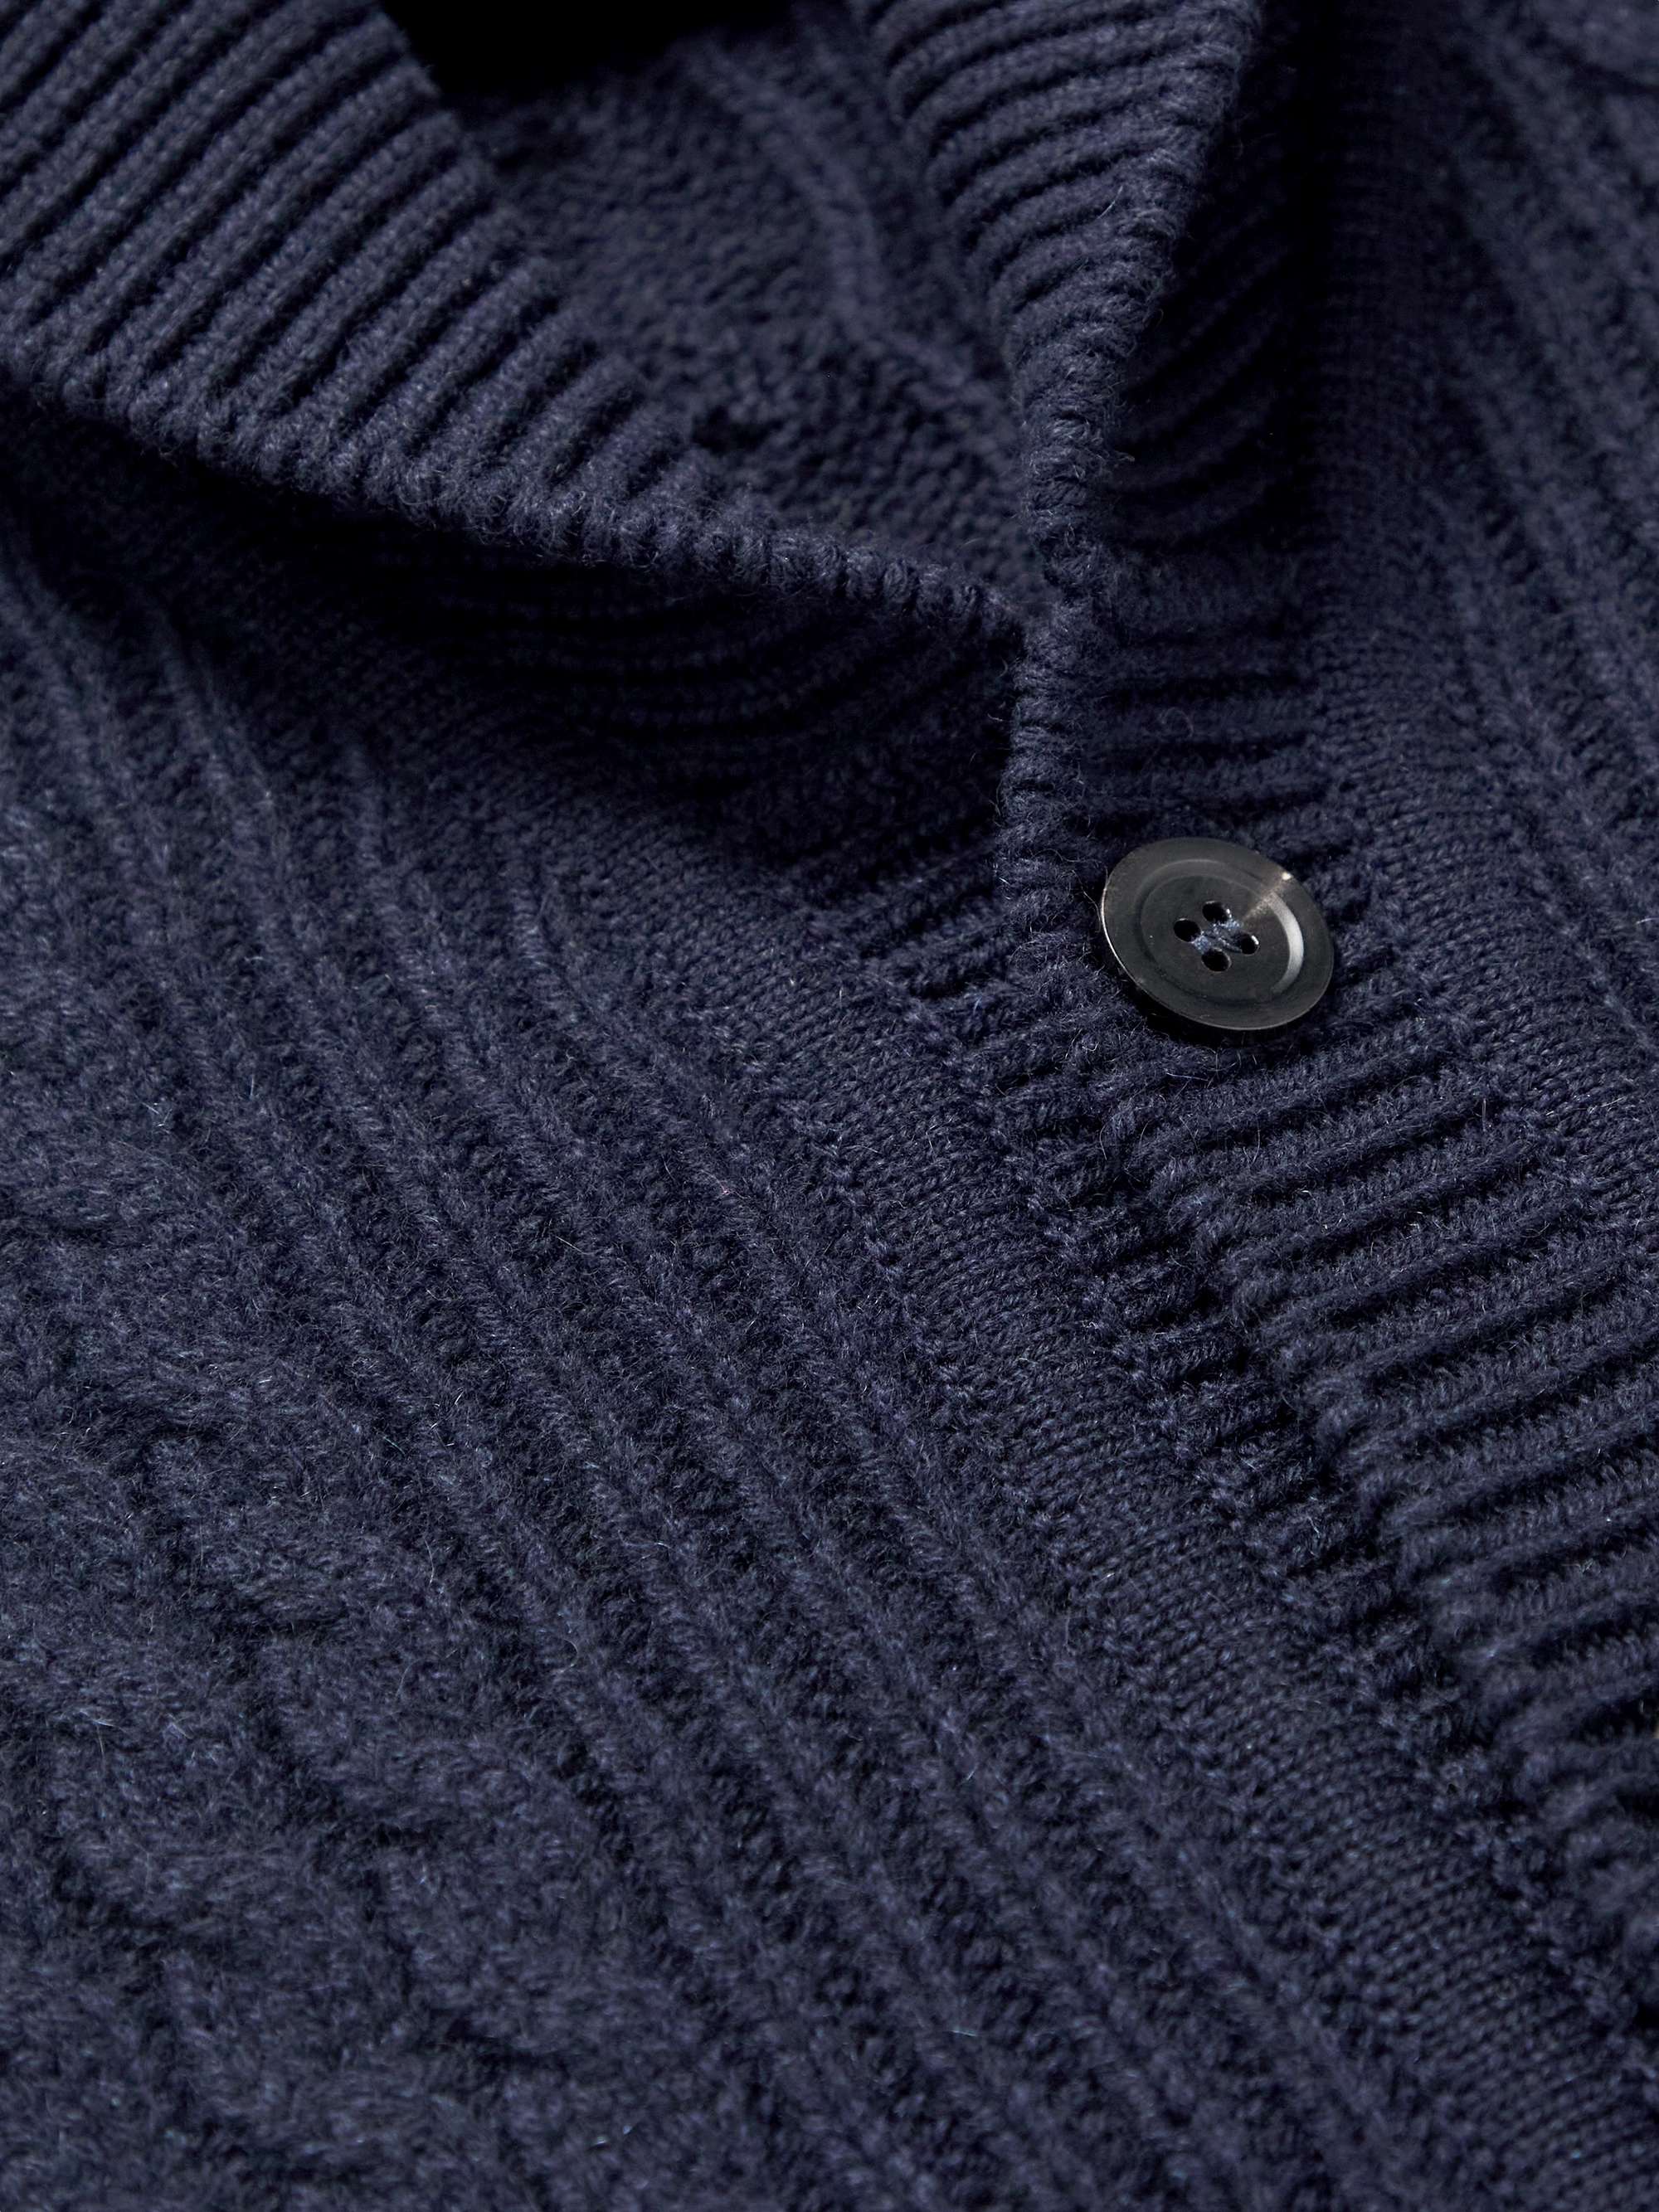 JOHNSTONS OF ELGIN Shawl-Collar Cable-Knit Cashmere Cardigan